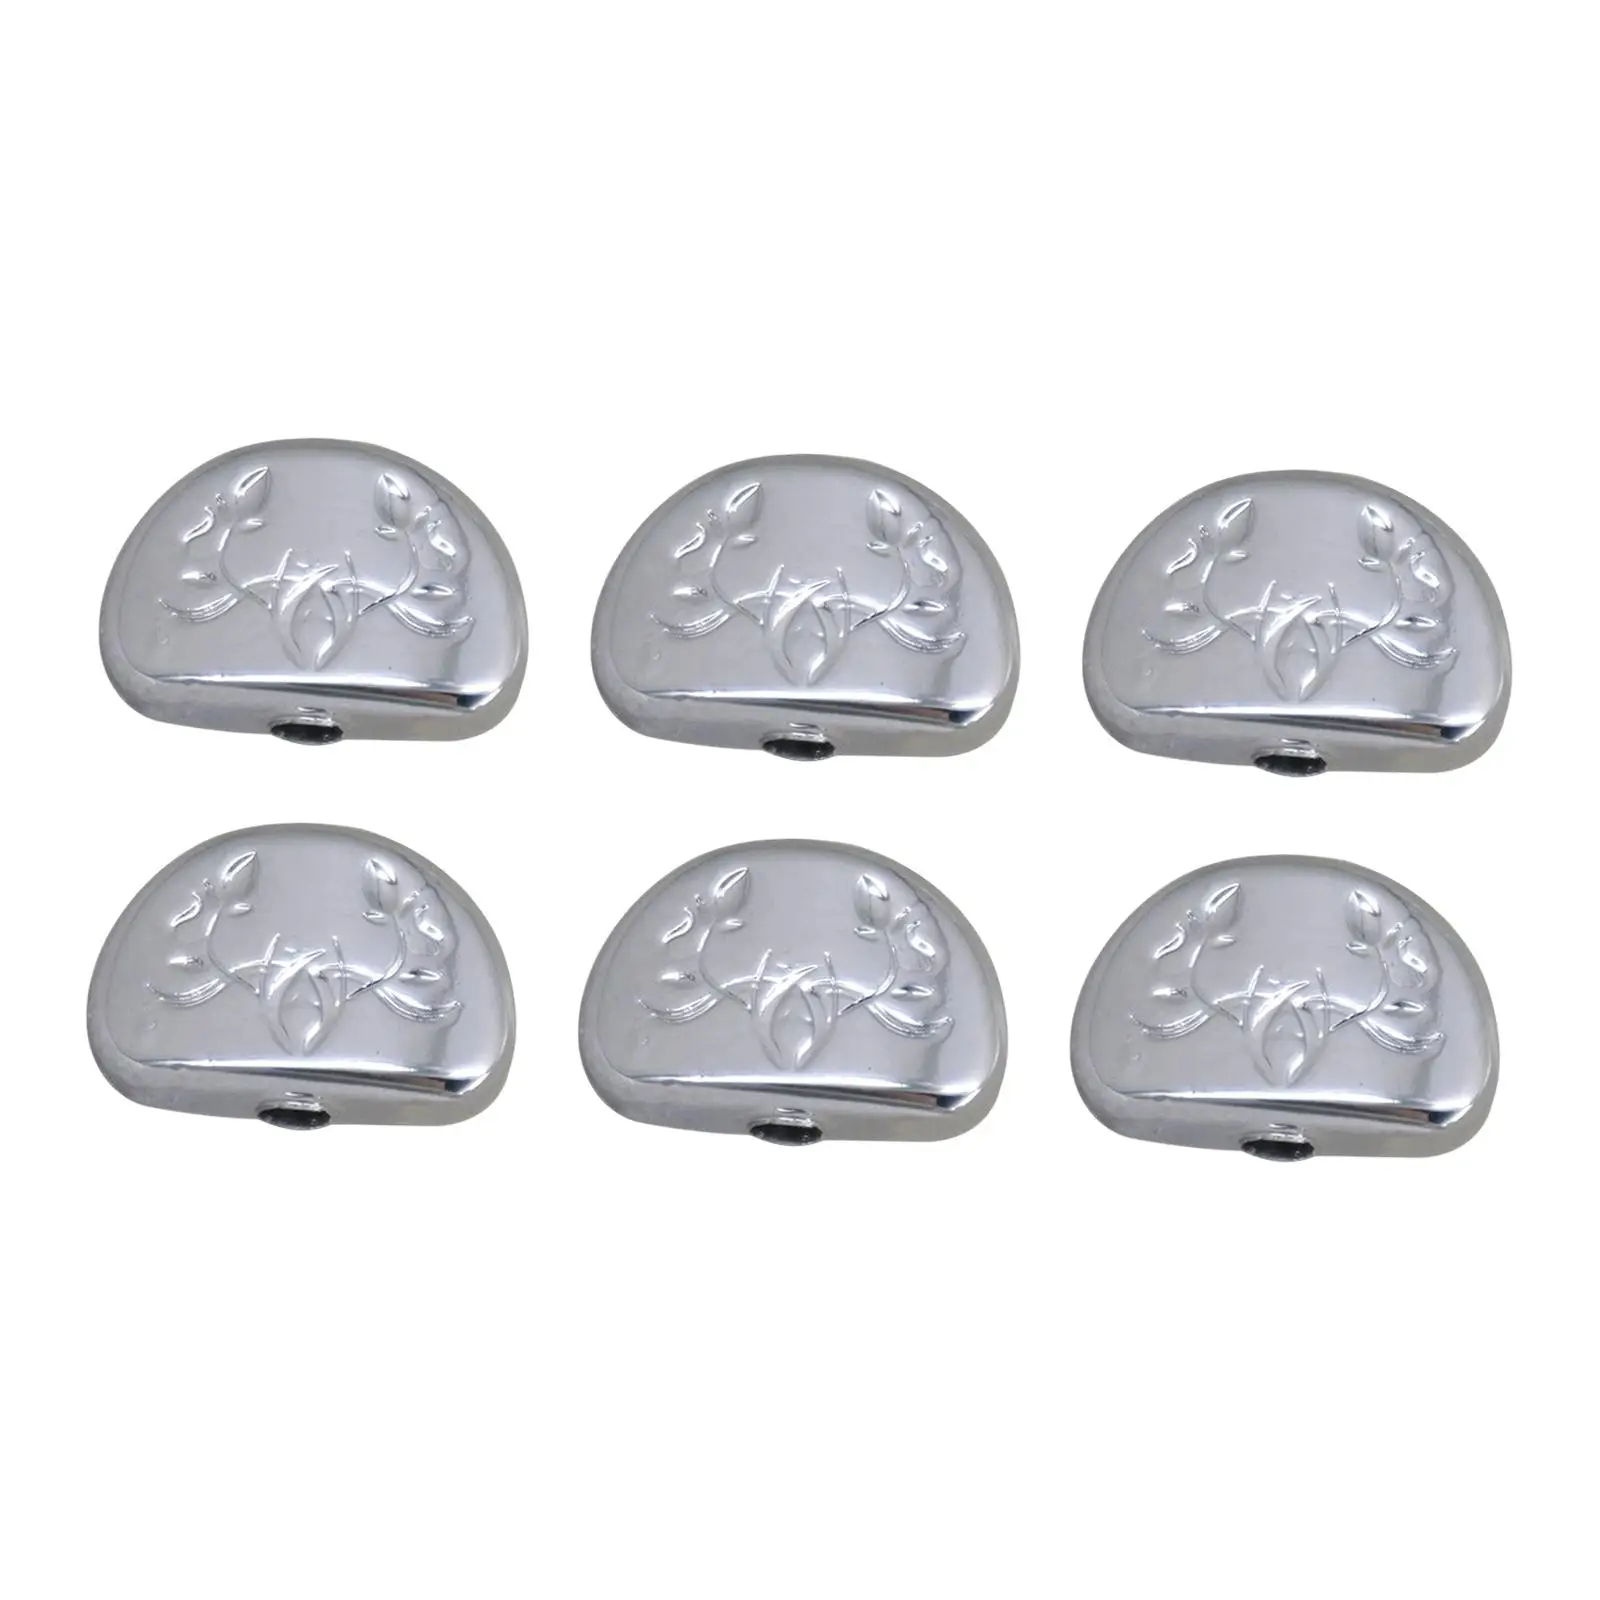  Pegs Machine Buttons, 6pcs   Patterns Tuning Key Button Replacement Parts  /Electric Guitar